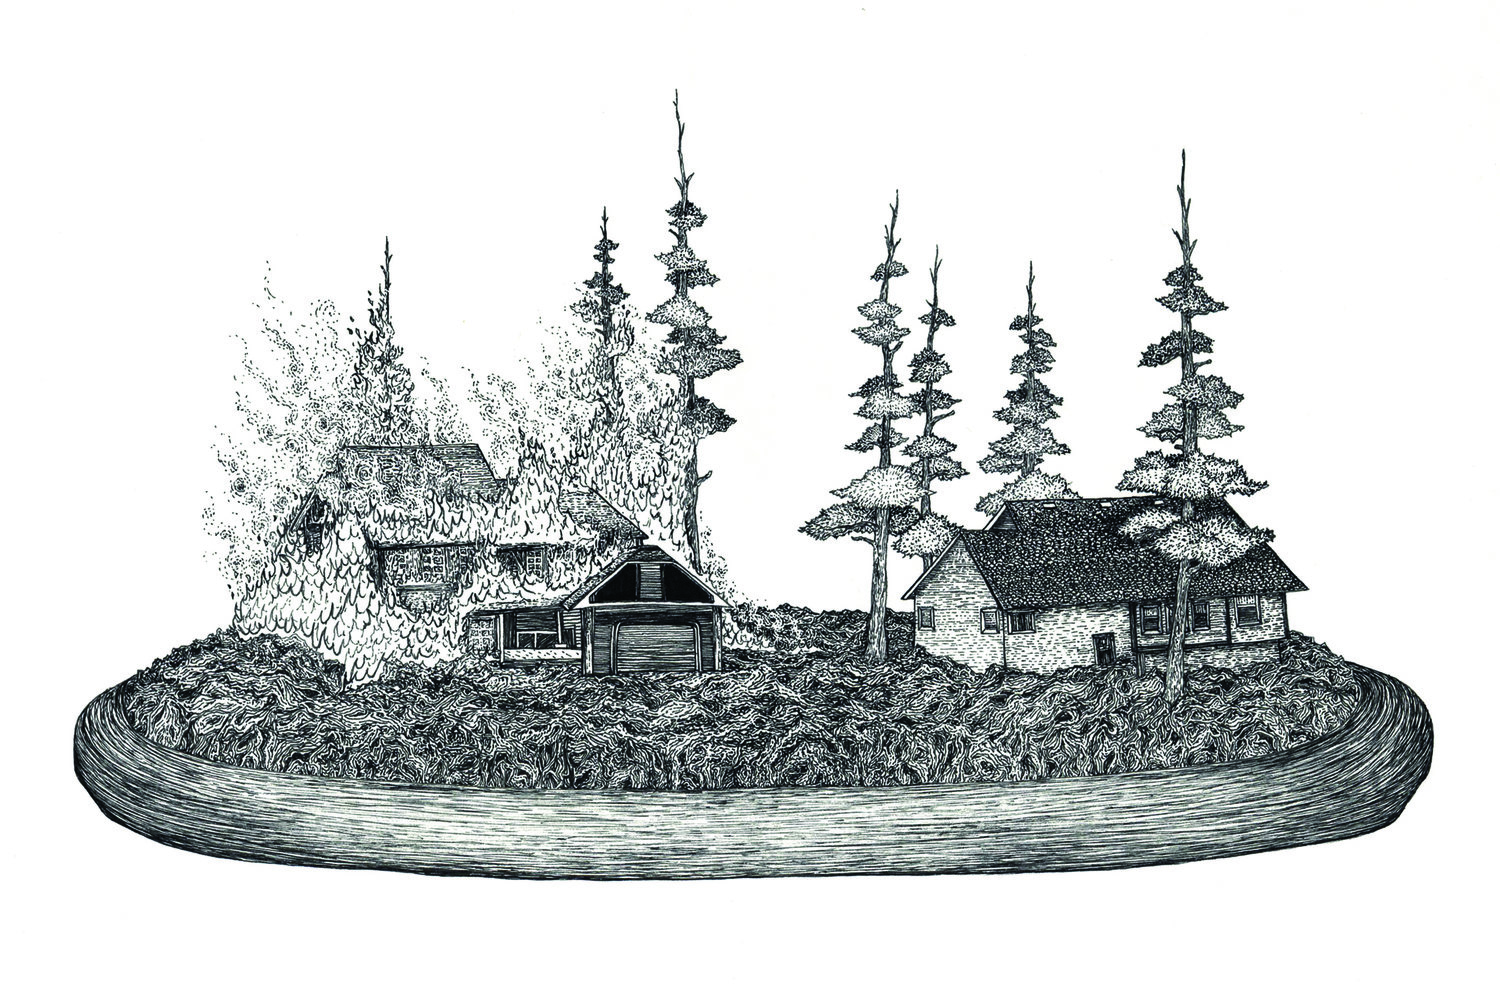 drawing of a saucer, with two houses in it among pine trees. one is on fire